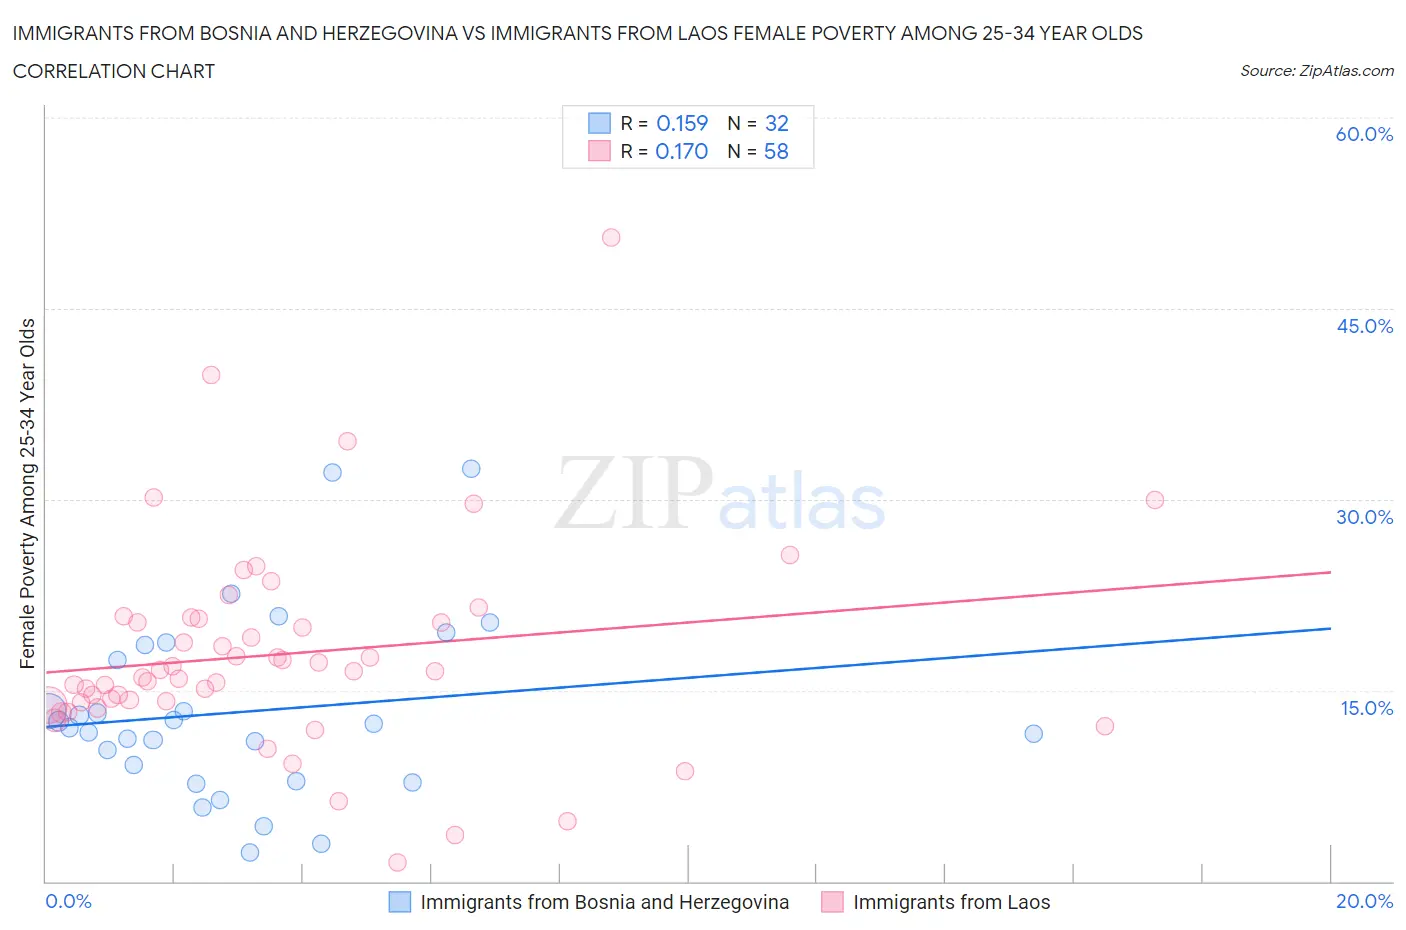 Immigrants from Bosnia and Herzegovina vs Immigrants from Laos Female Poverty Among 25-34 Year Olds